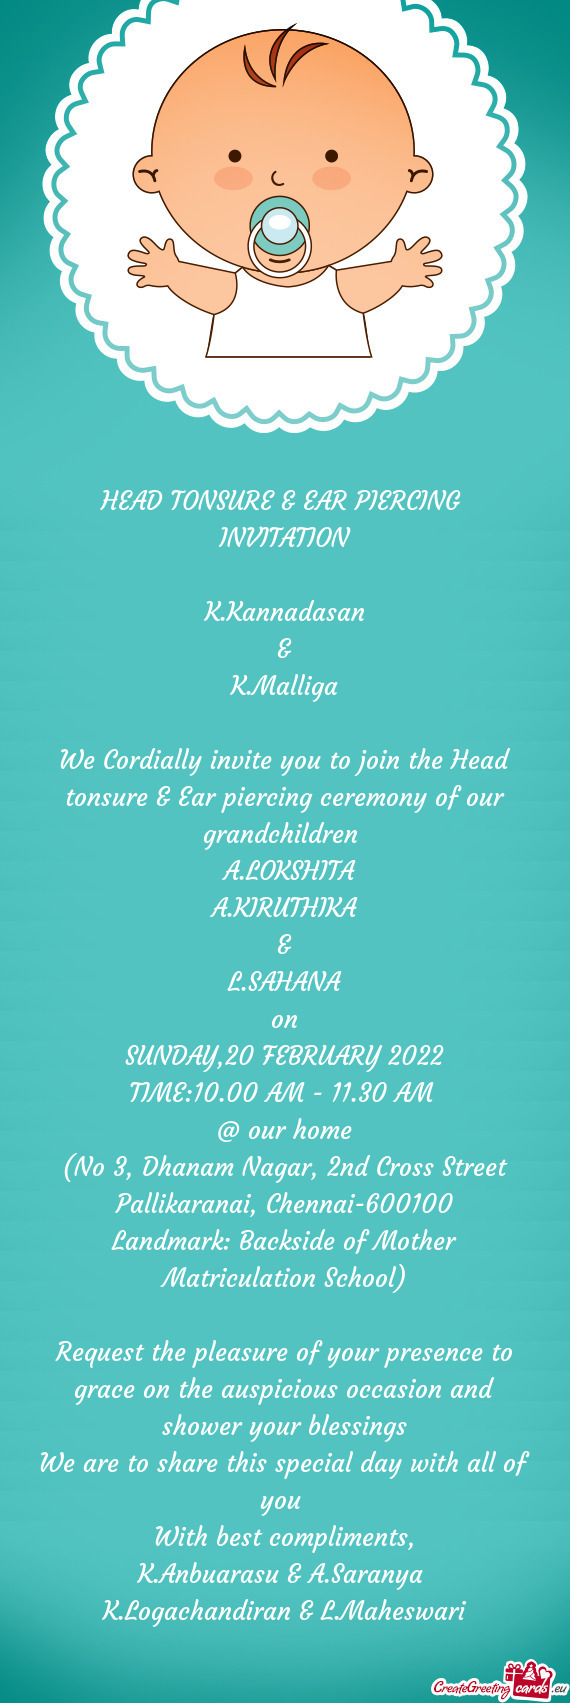 We Cordially invite you to join the Head tonsure & Ear piercing ceremony of our grandchildren